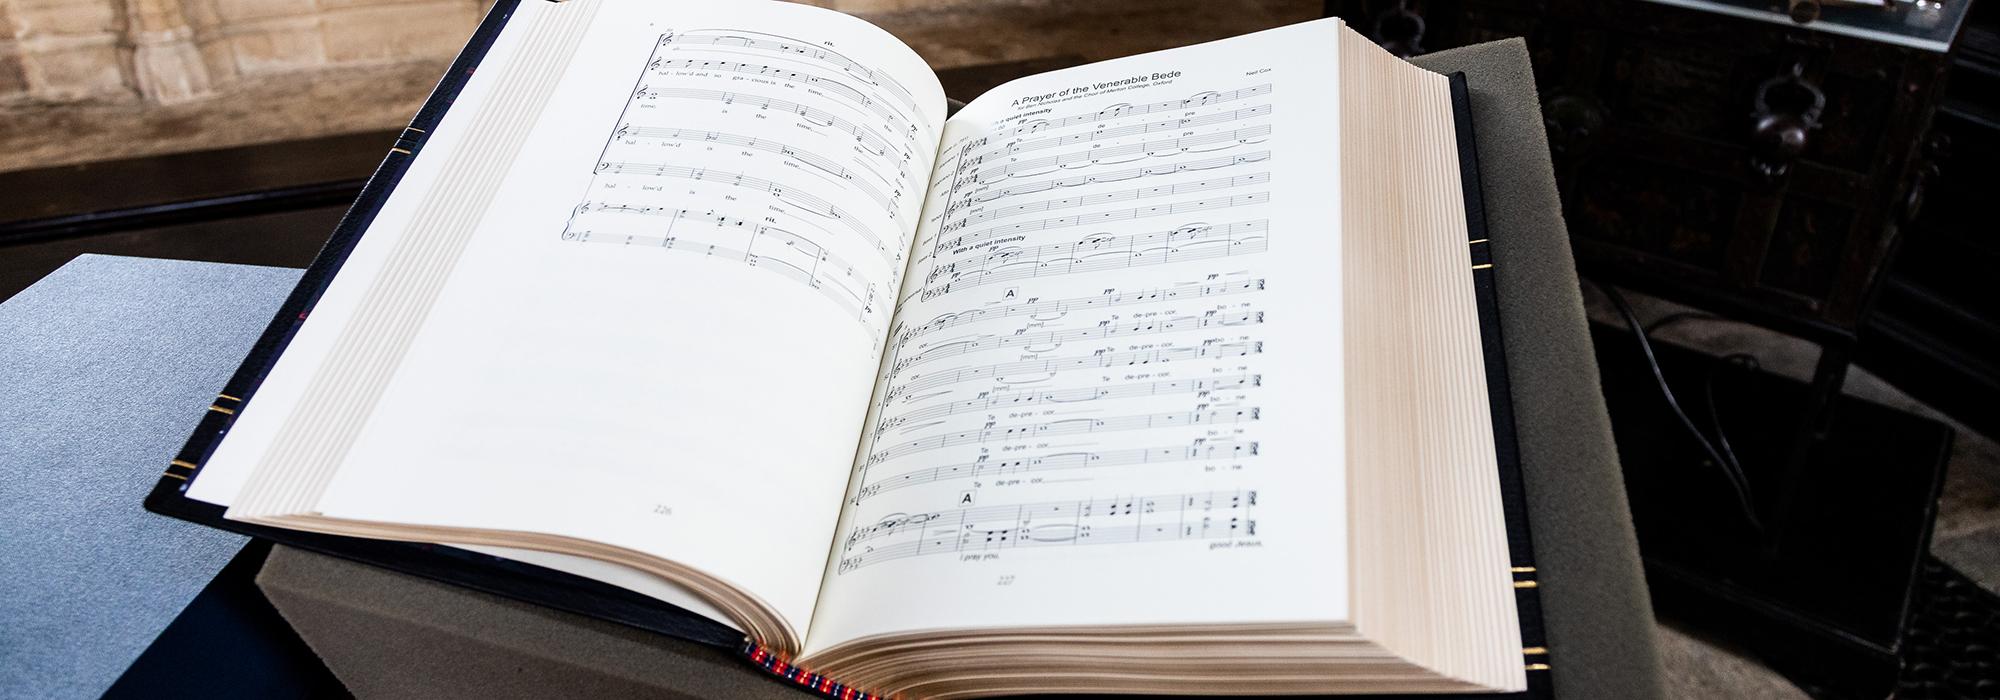 A copy of the Merton Choirbook on display at an event for benefactors, June 2018 - Photo: © Keith Barnes - www.photographersworkshop.co.uk